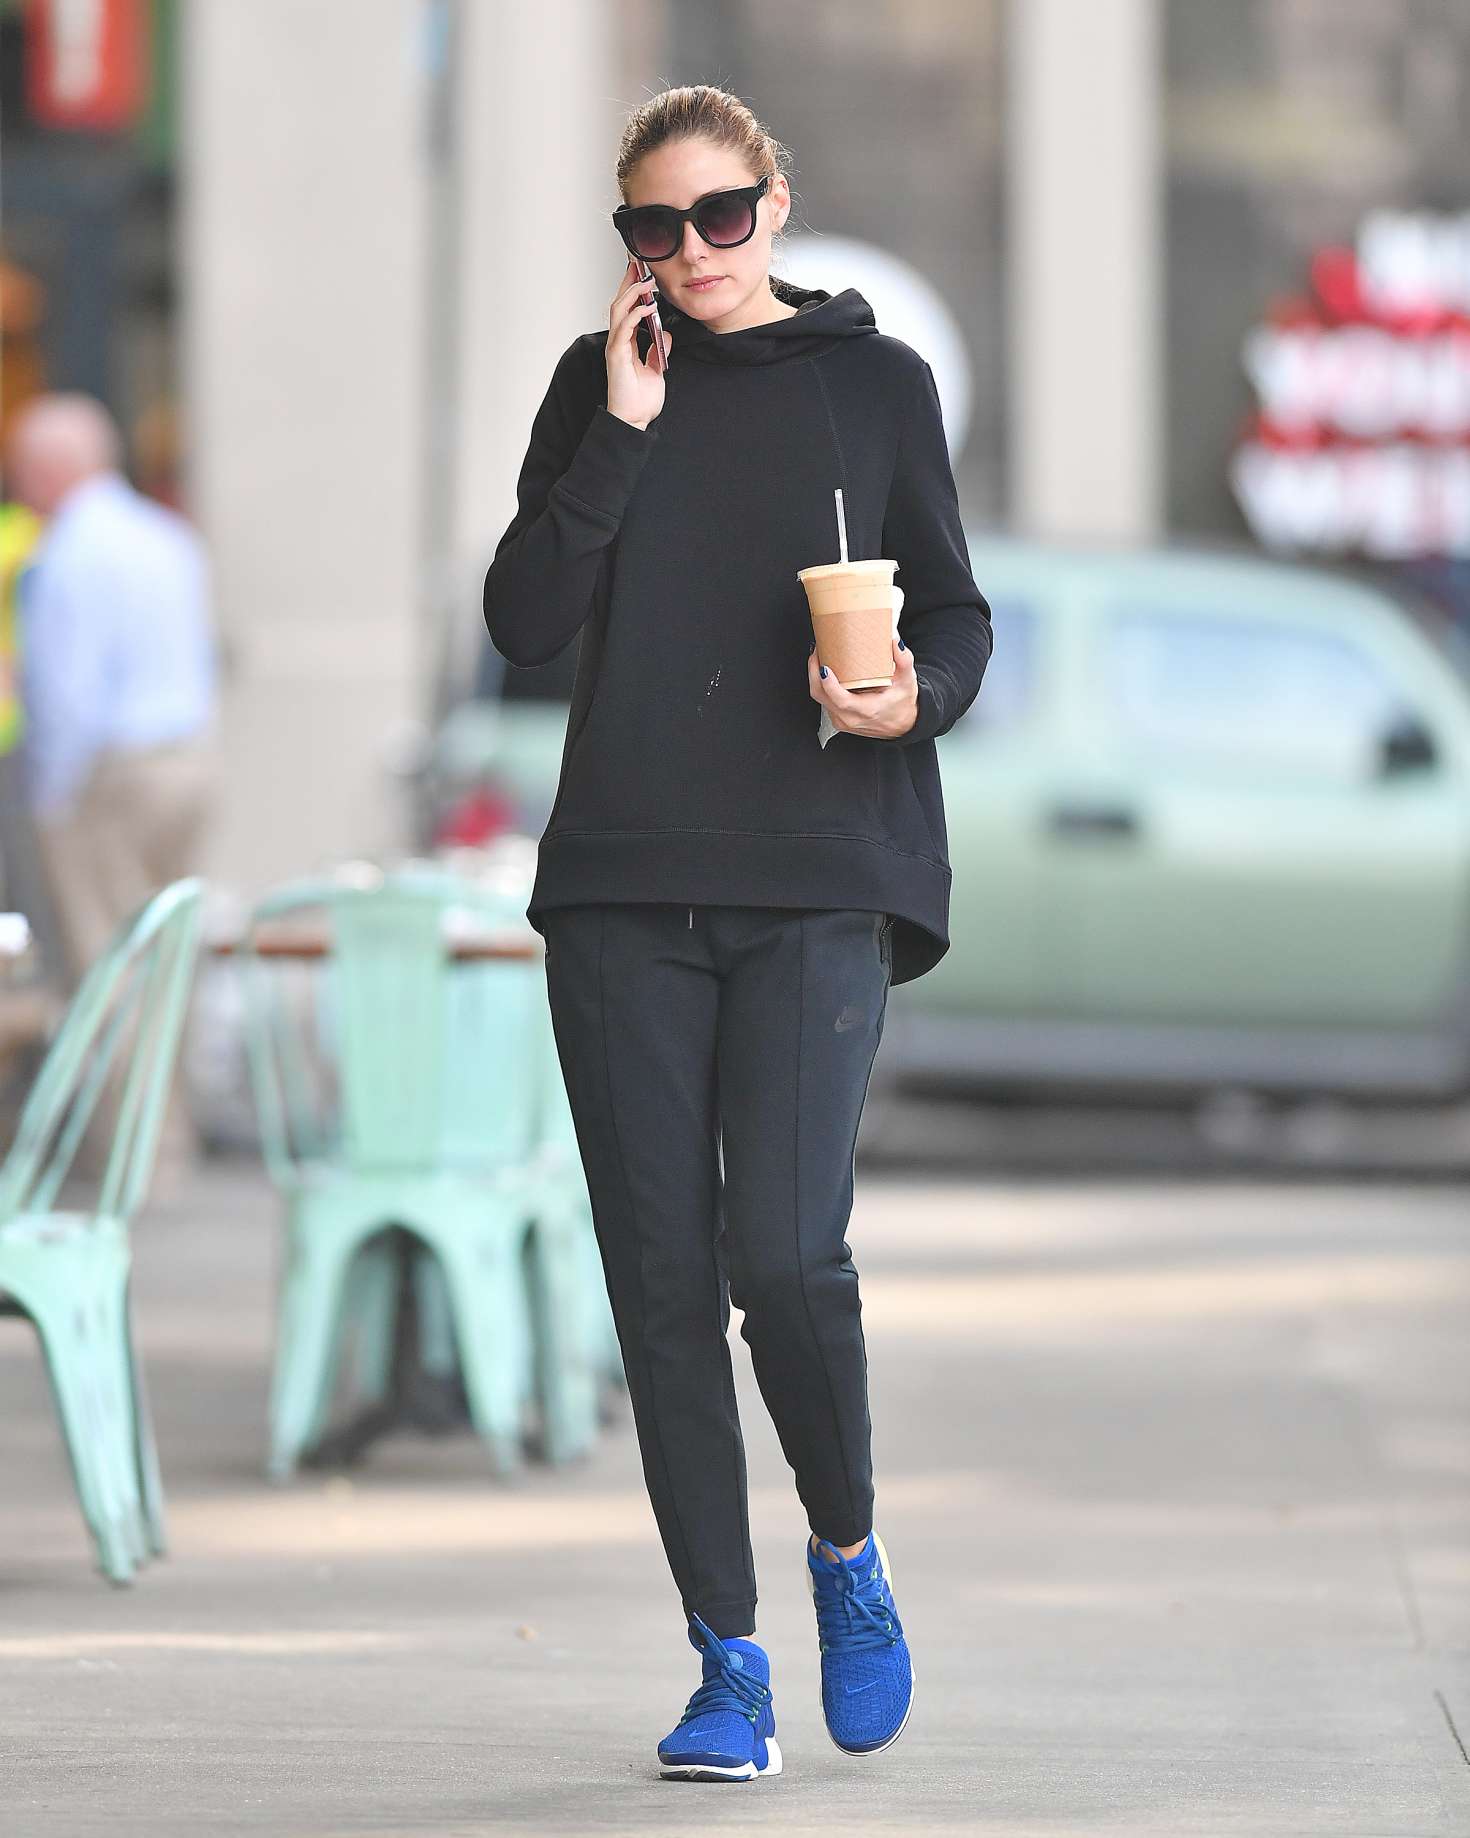 Olivia Palermo out in Brooklyn -02 | GotCeleb